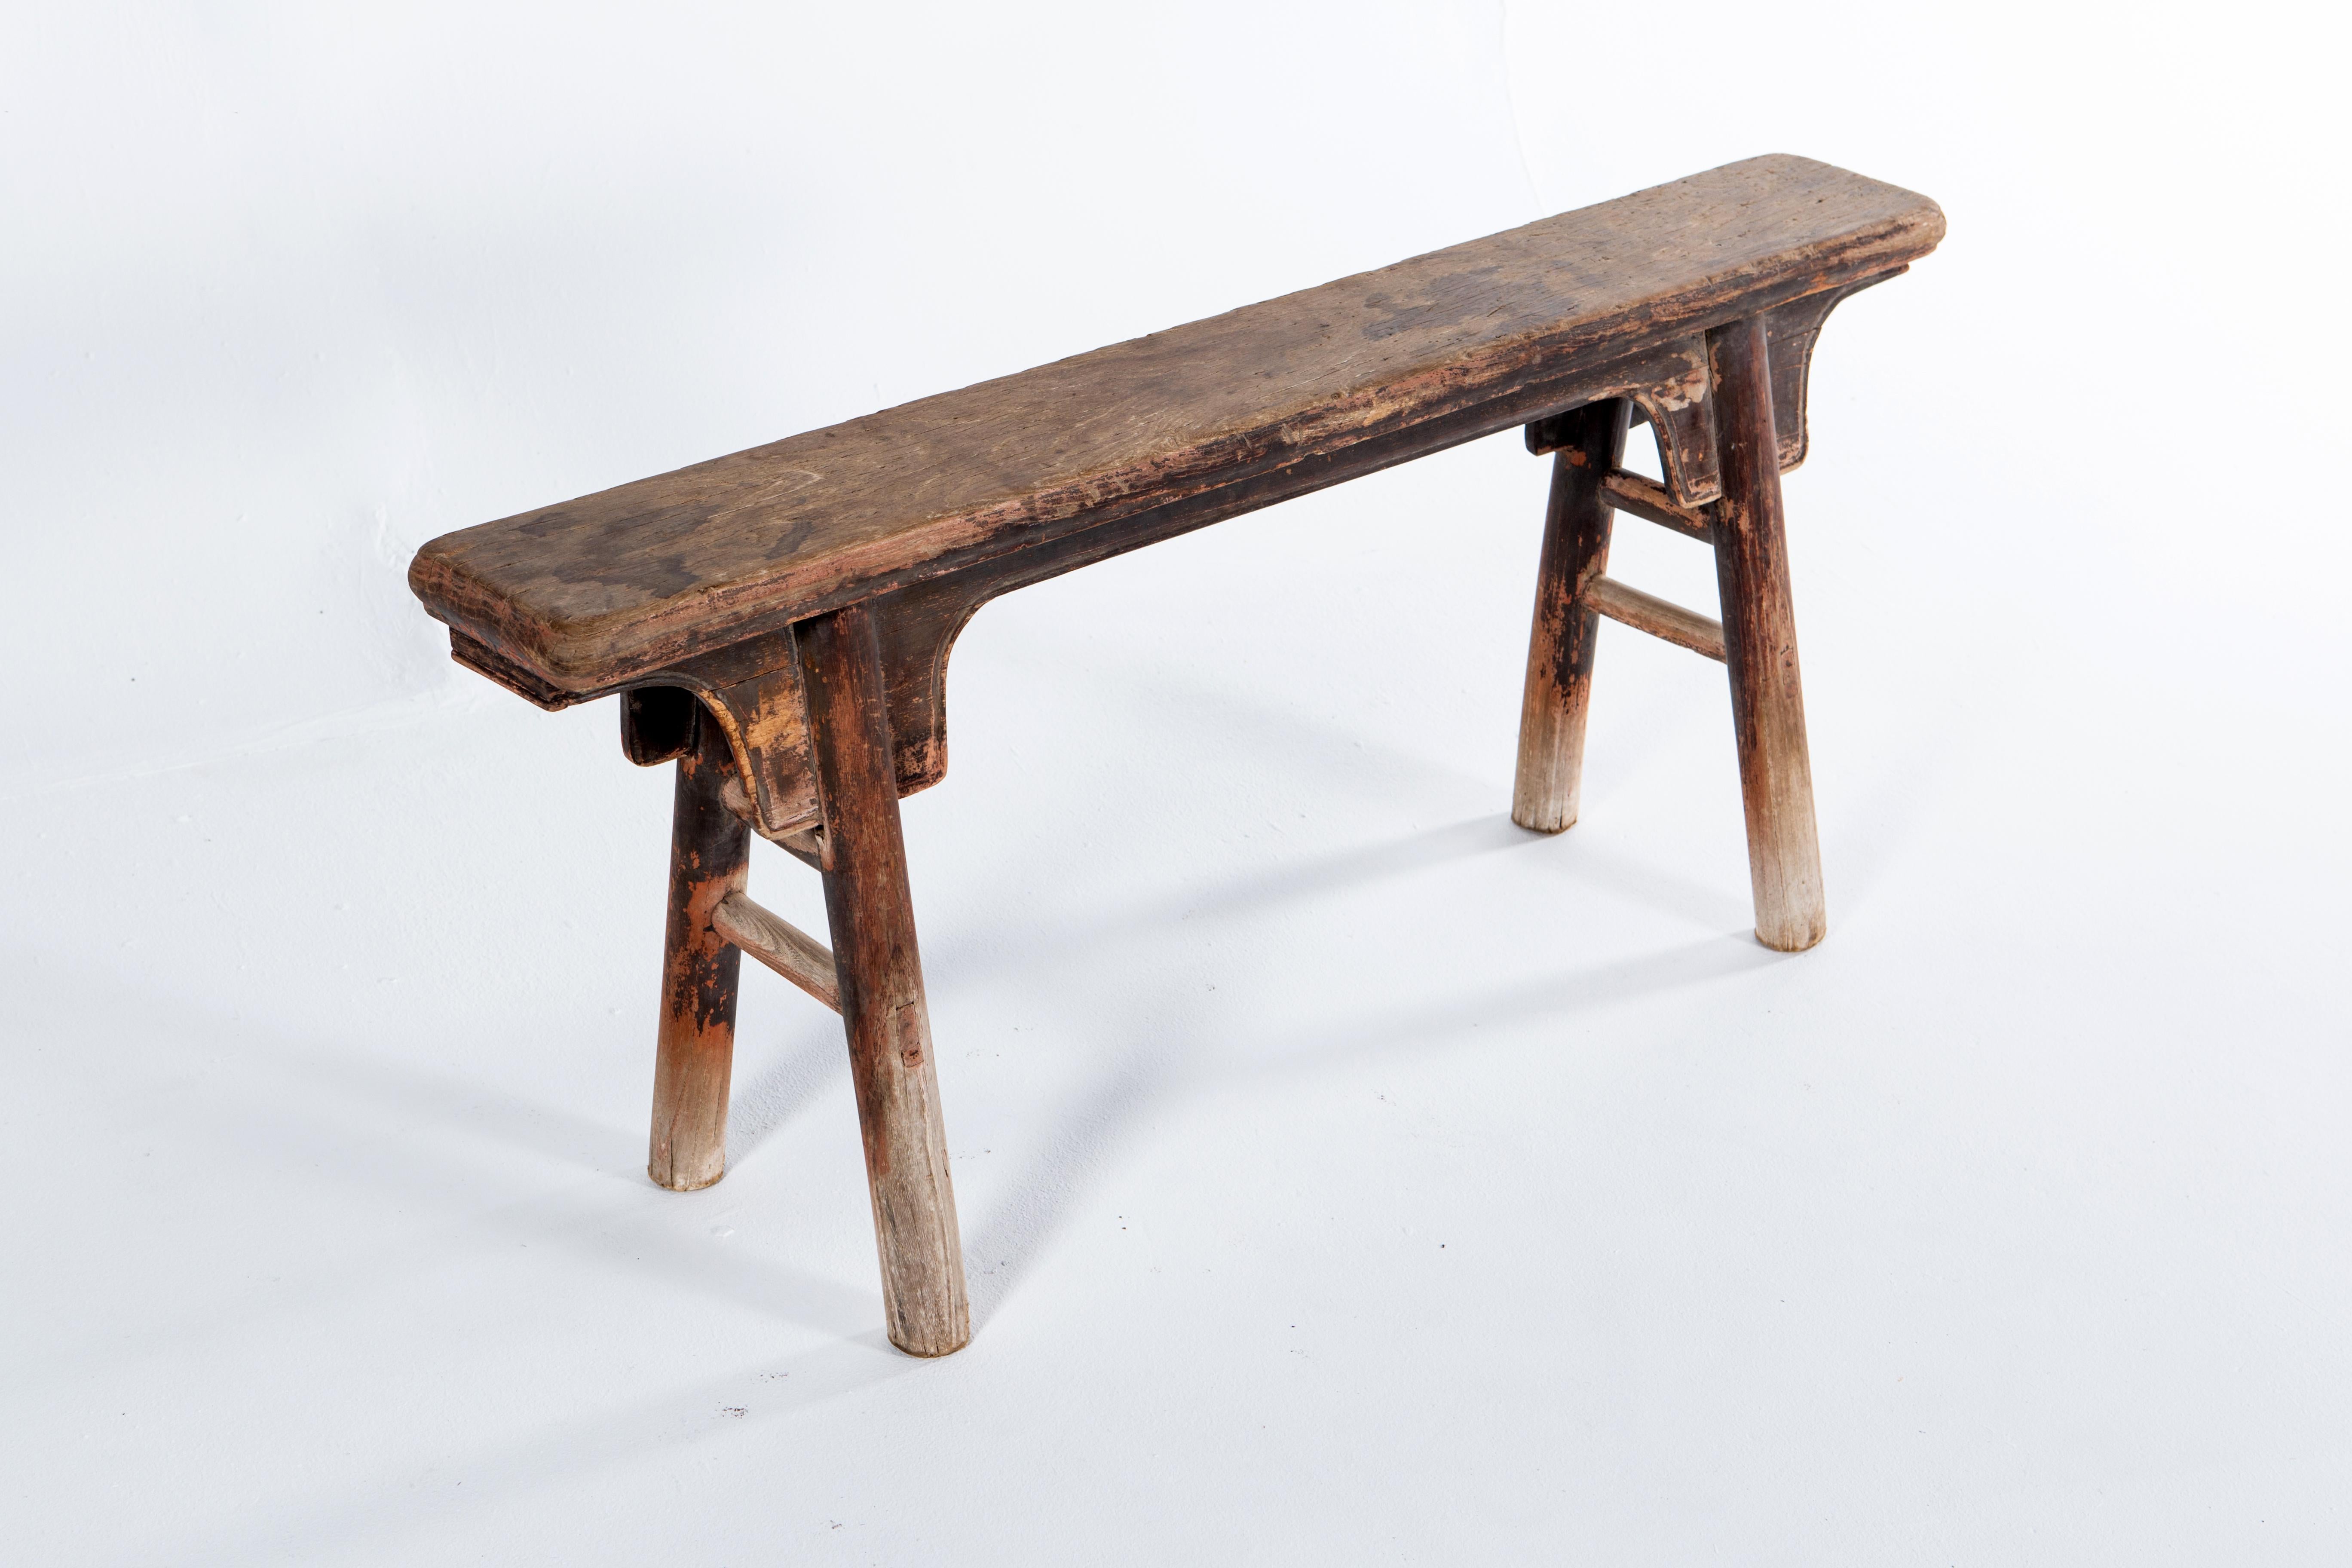 This classic two-person Chinese bench features simple cloud-motif stretchers, splayed legs, and traces of original lacquer. The antique patina is beautifully aged and original. Wear consistent with age and use.